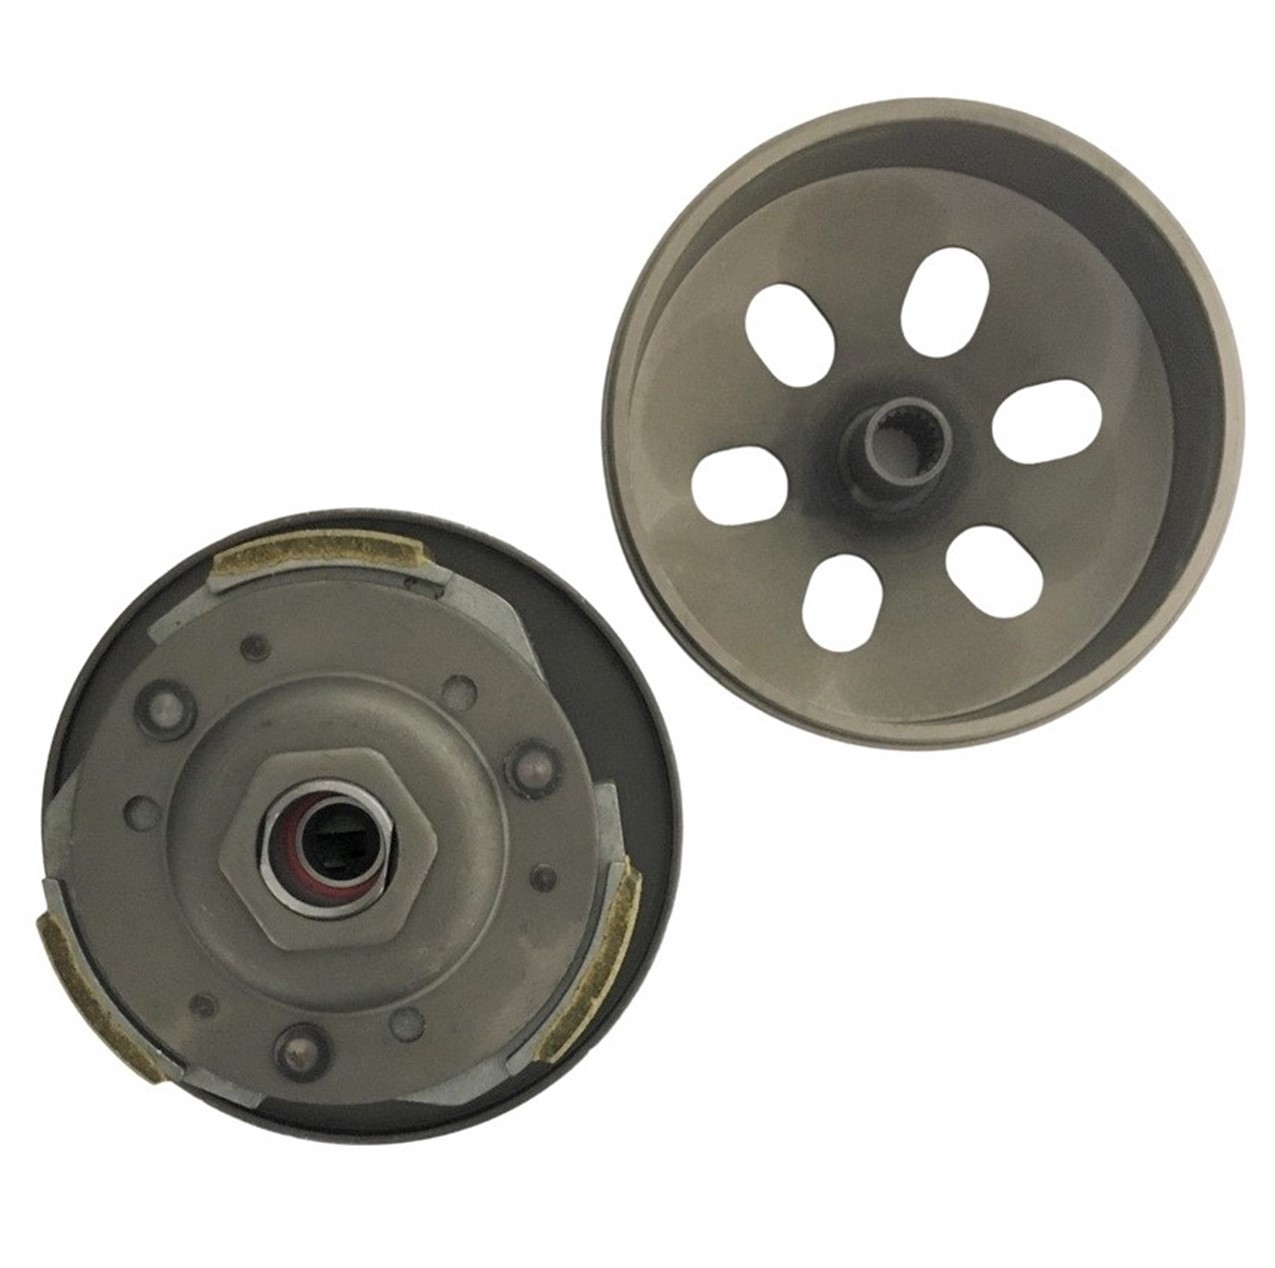 Rear Drive Clutch-Driven Pulley GY6-125, GY6-150 Chinese ATVs, GoKarts, Scooters Bell ID=125mm, Shaft =15mm, Splines=19 - Click Image to Close